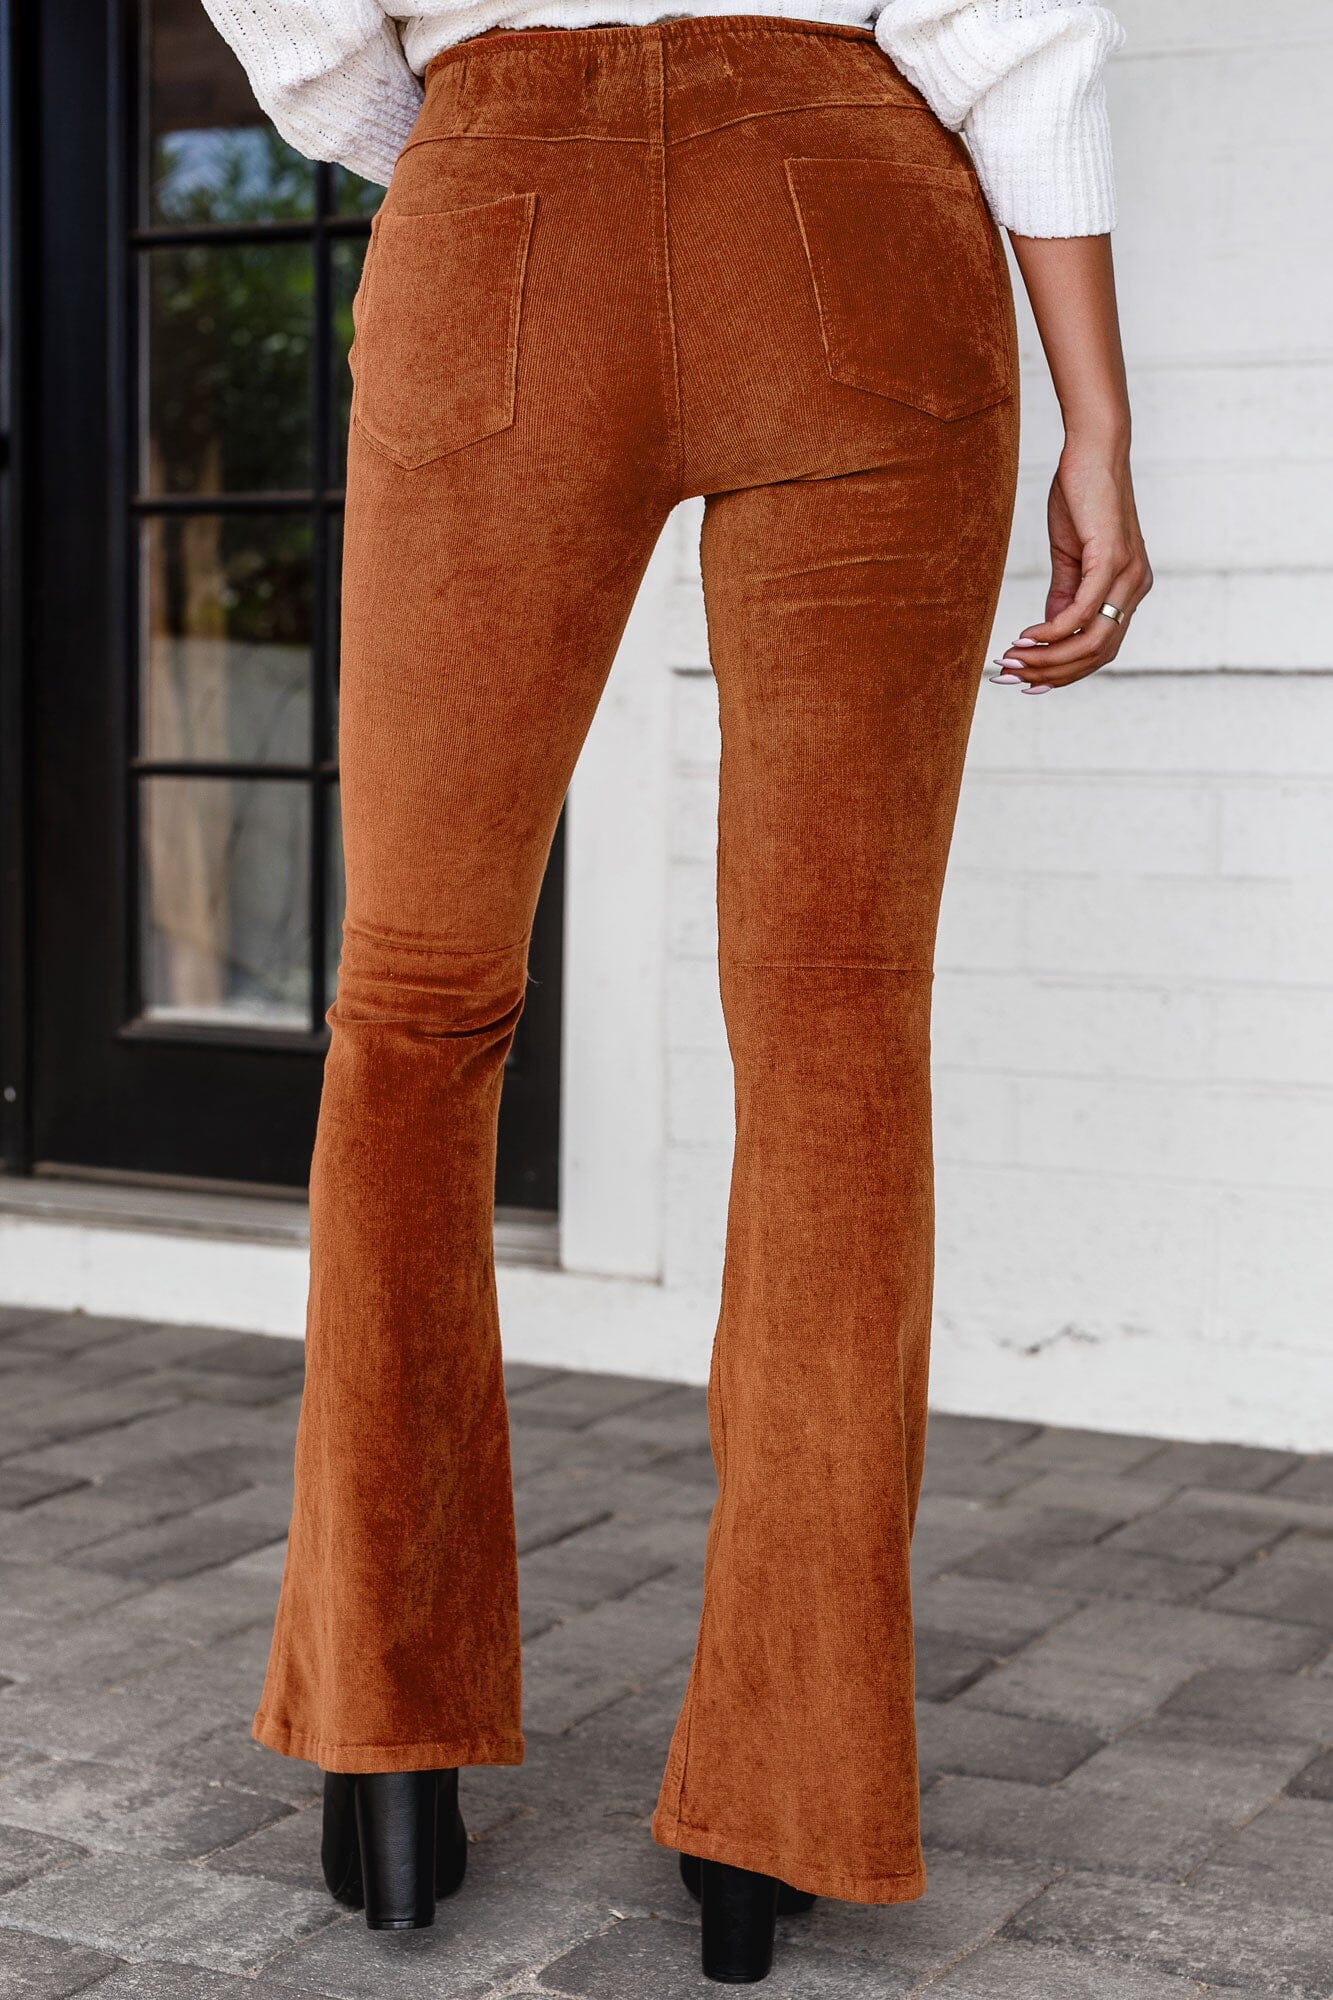 Women Genuine Suede Flared Pants Brown Real Leather Trousers